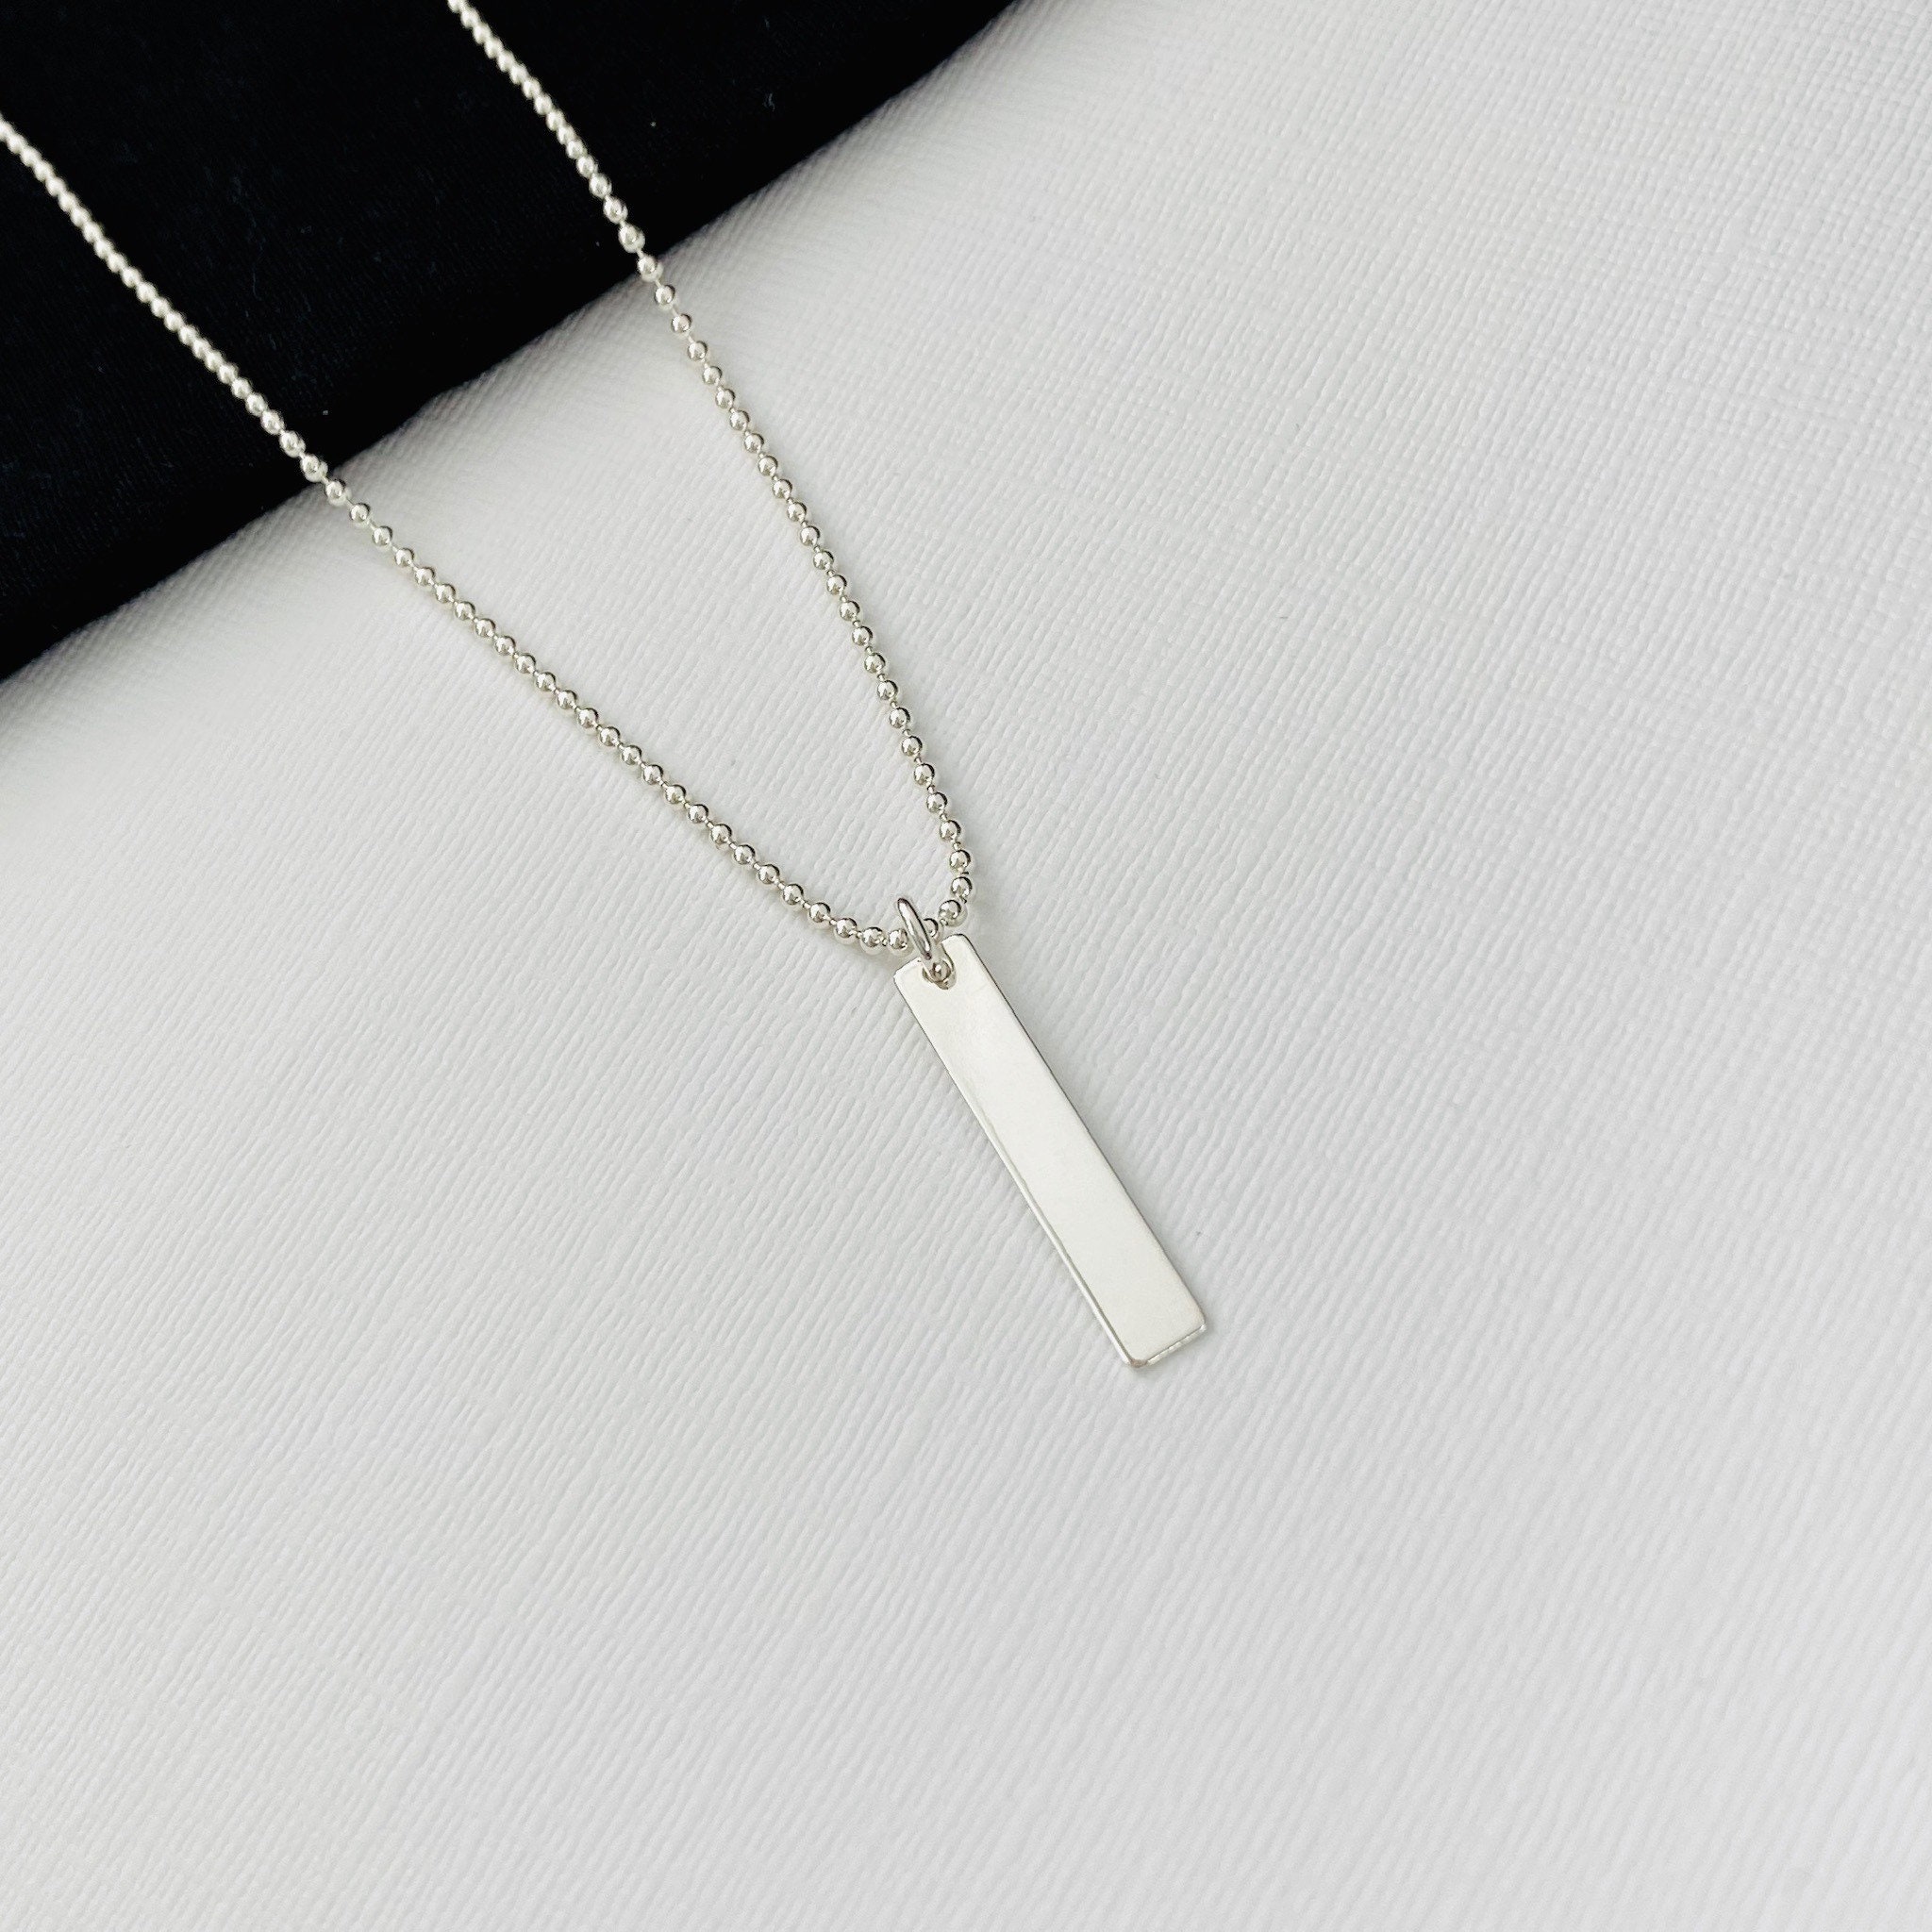 Zysta Silver Cool Simple Bar Necklace Men Women Dangle Vertical Cuboid  Stick Pendant 24 inches Chain Stainless Steel Jewelry Gift : :  Fashion